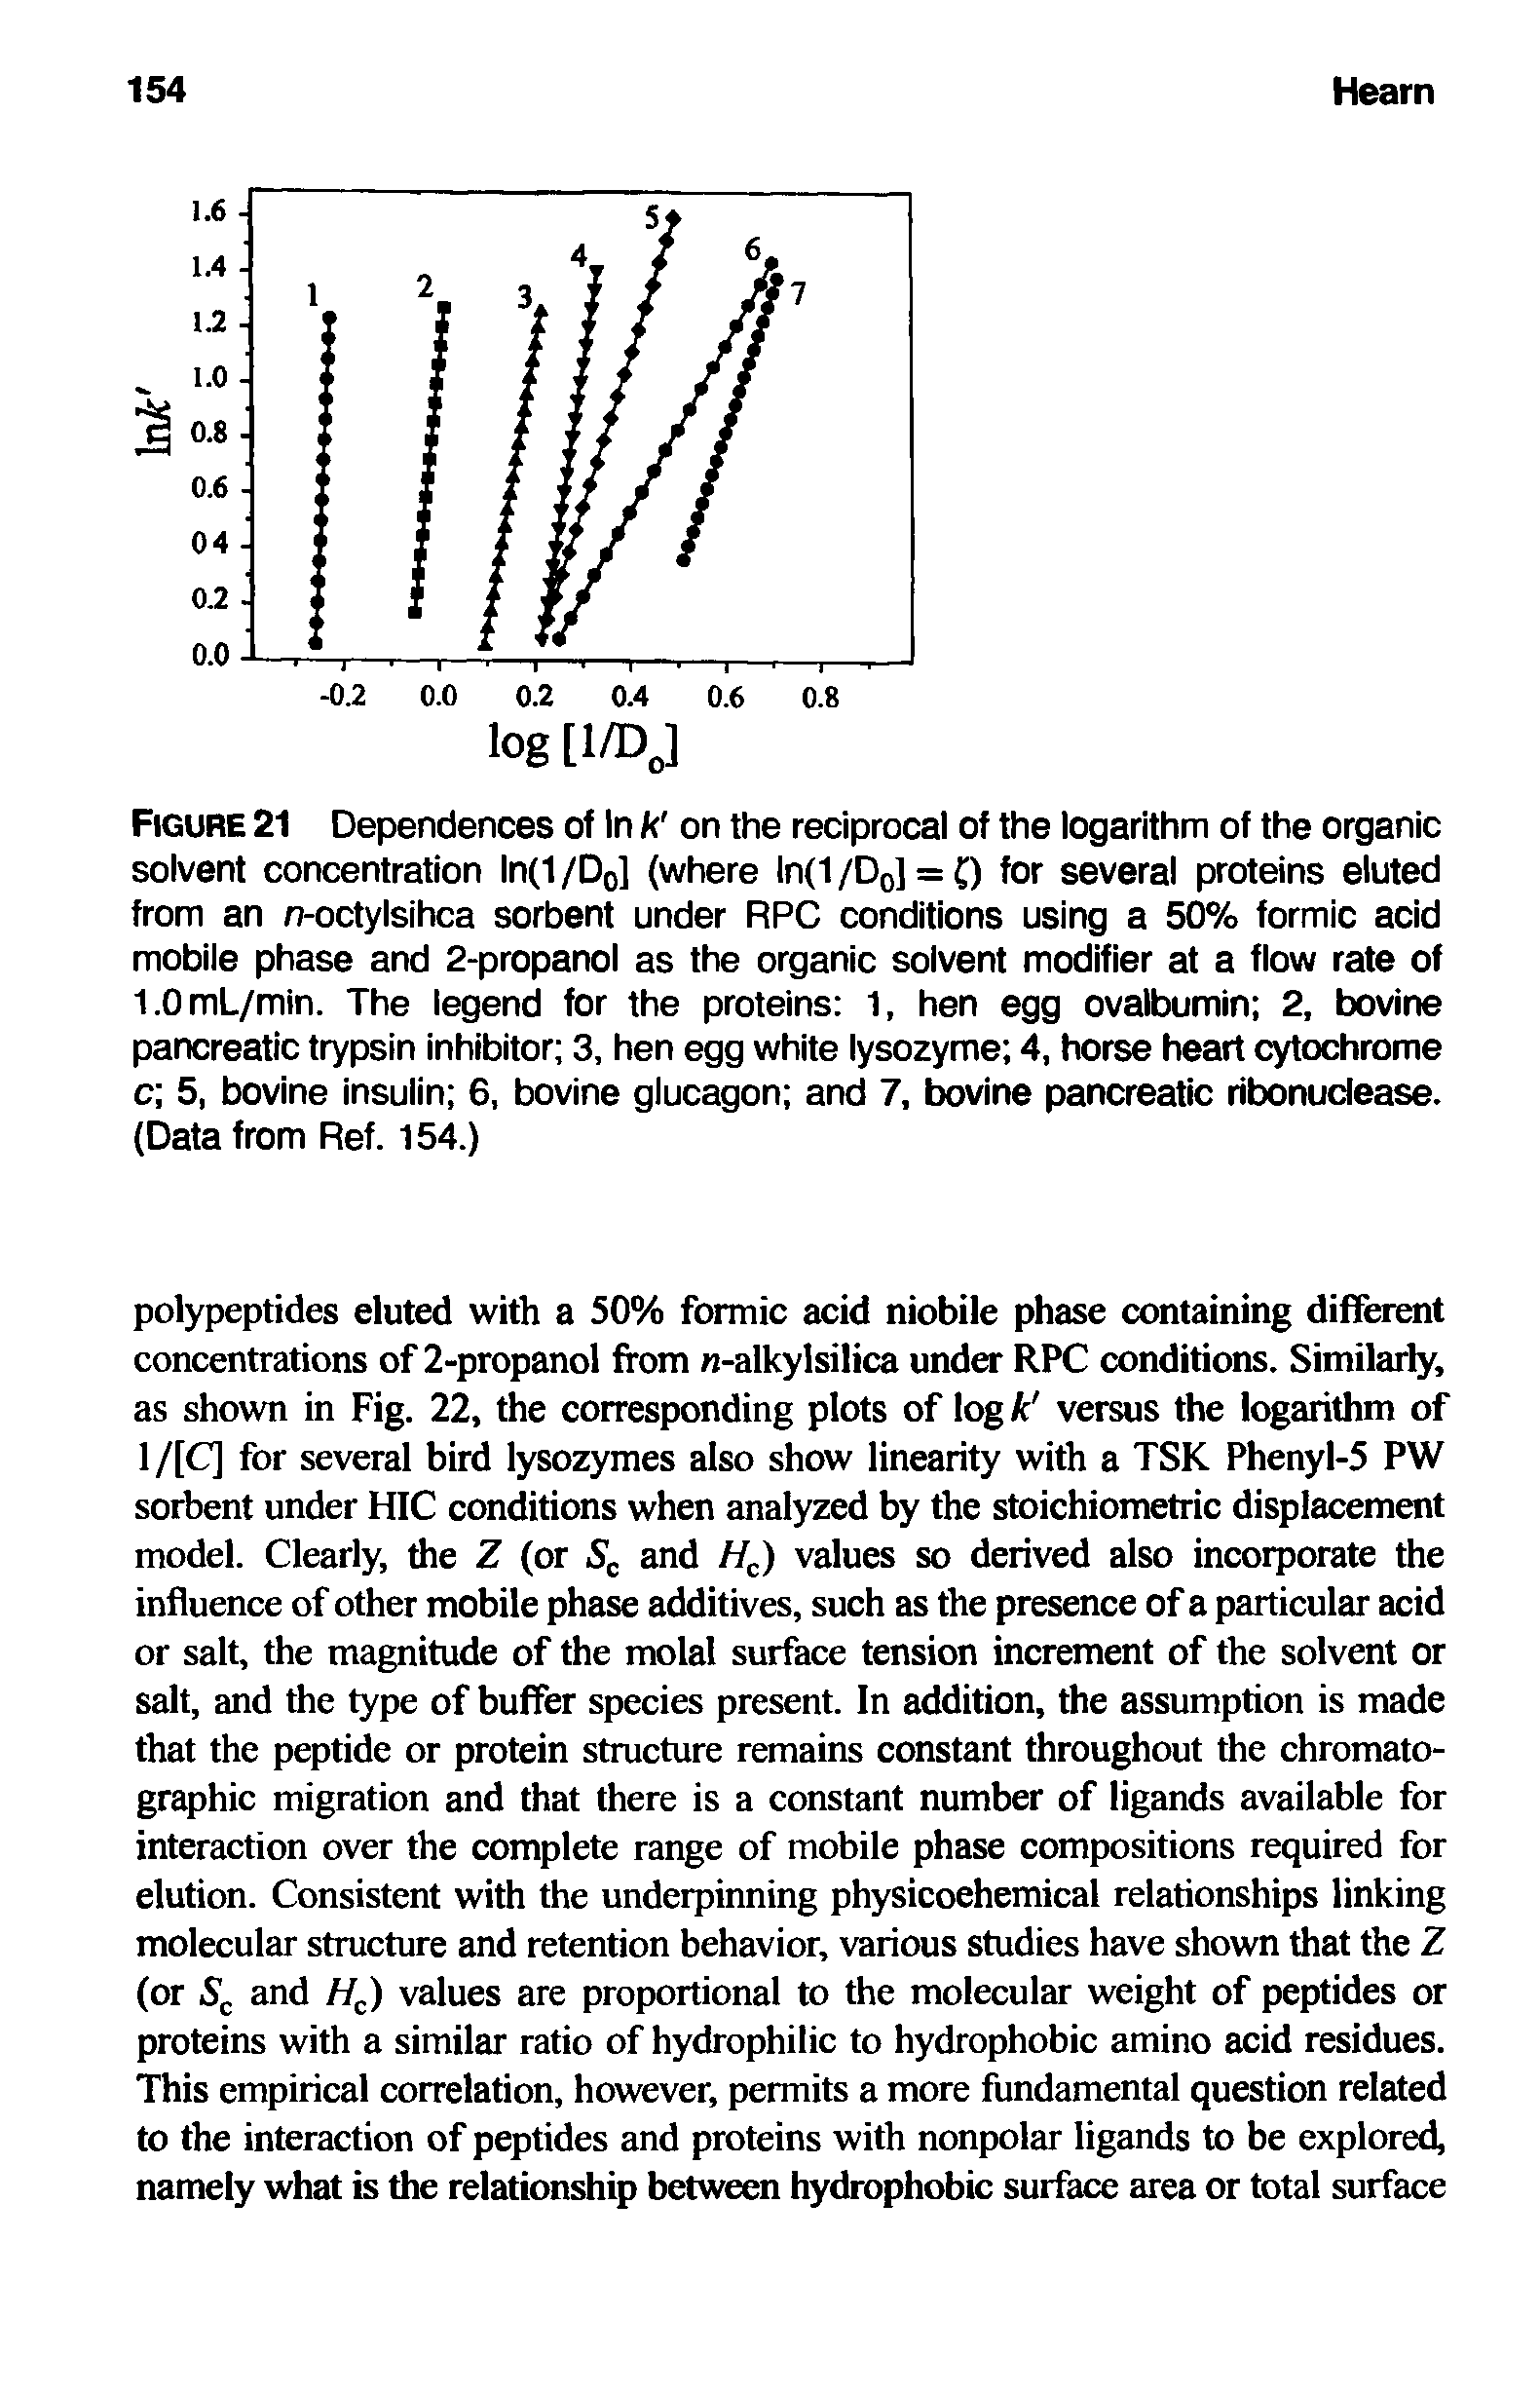 Figure 21 Dependences of In k on the reciprocal of the logarithm of the organic solvent concentration ln(1 /Dq] (where ln(1 /Dq] = 0 for several proteins eluted from an r -octylsihca sorbent under RPC conditions using a 50% formic acid mobiie phase and 2-propanol as the organic soivent modifier at a flow rate of 1.0mL/min. The legend for the proteins 1, hen egg ovalbumin 2, bovine pancreatic trypsin inhibitor 3. hen egg white iysozyme 4, horse heart cytochrome c 5, bovine insuiin 6, bovine giucagon and 7, tovine pancreatic ribonudease. (Data from Ref. 154.)...